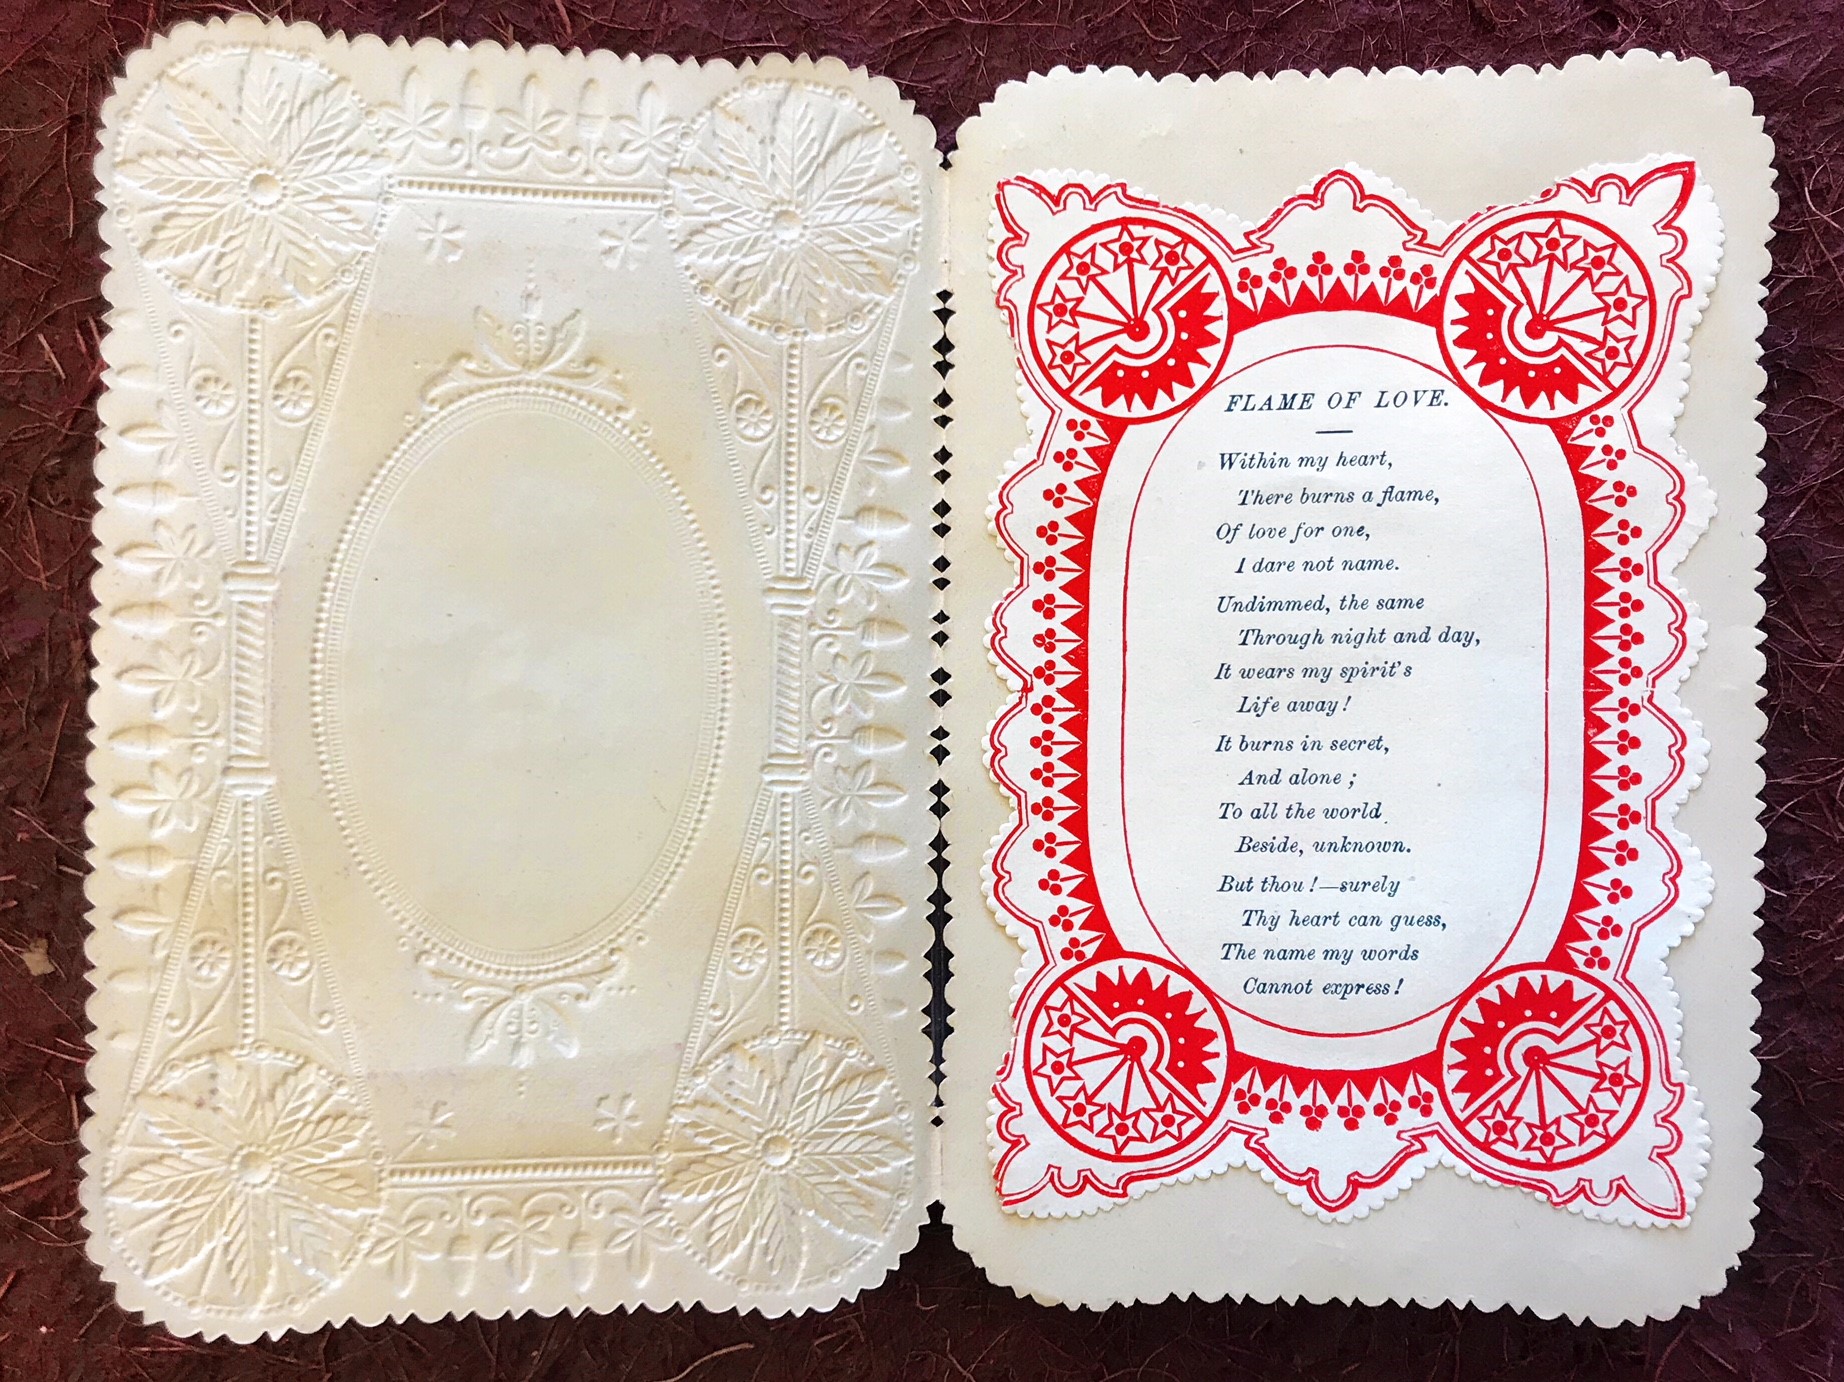 paper lace valentines card with poem